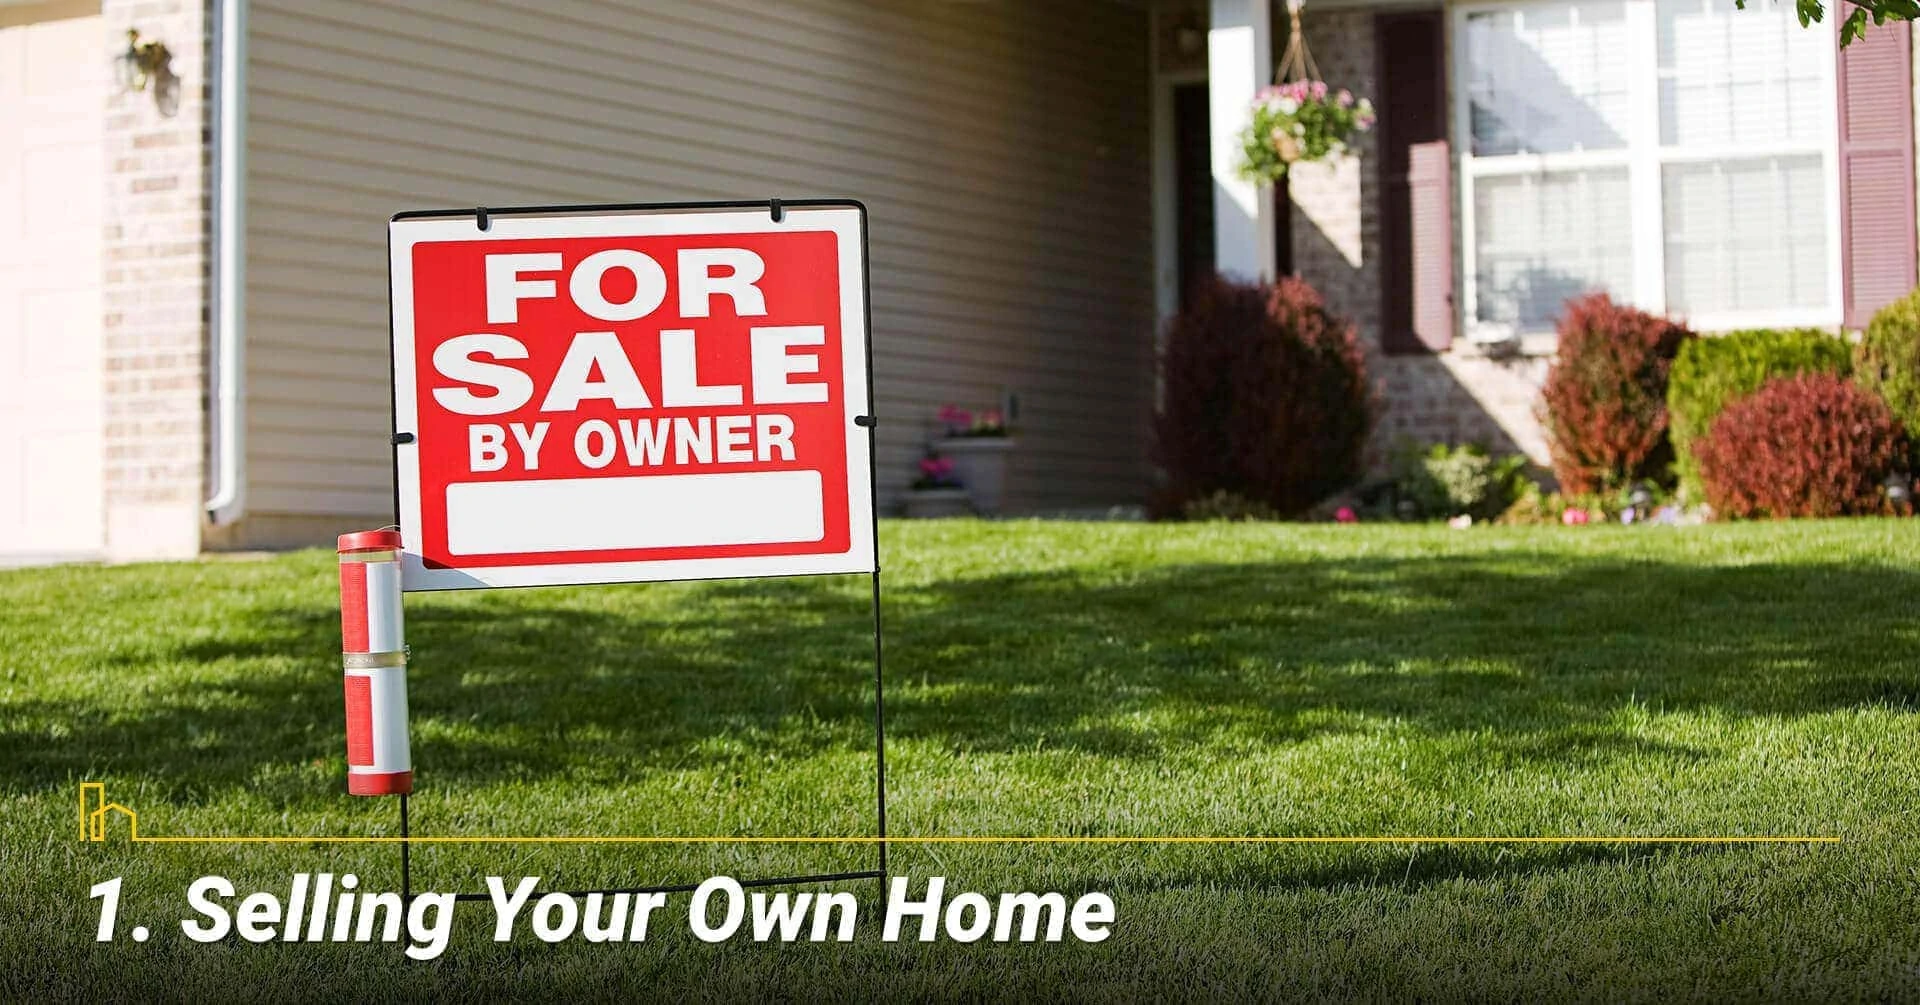 Selling Your Own Home, for sale by owner